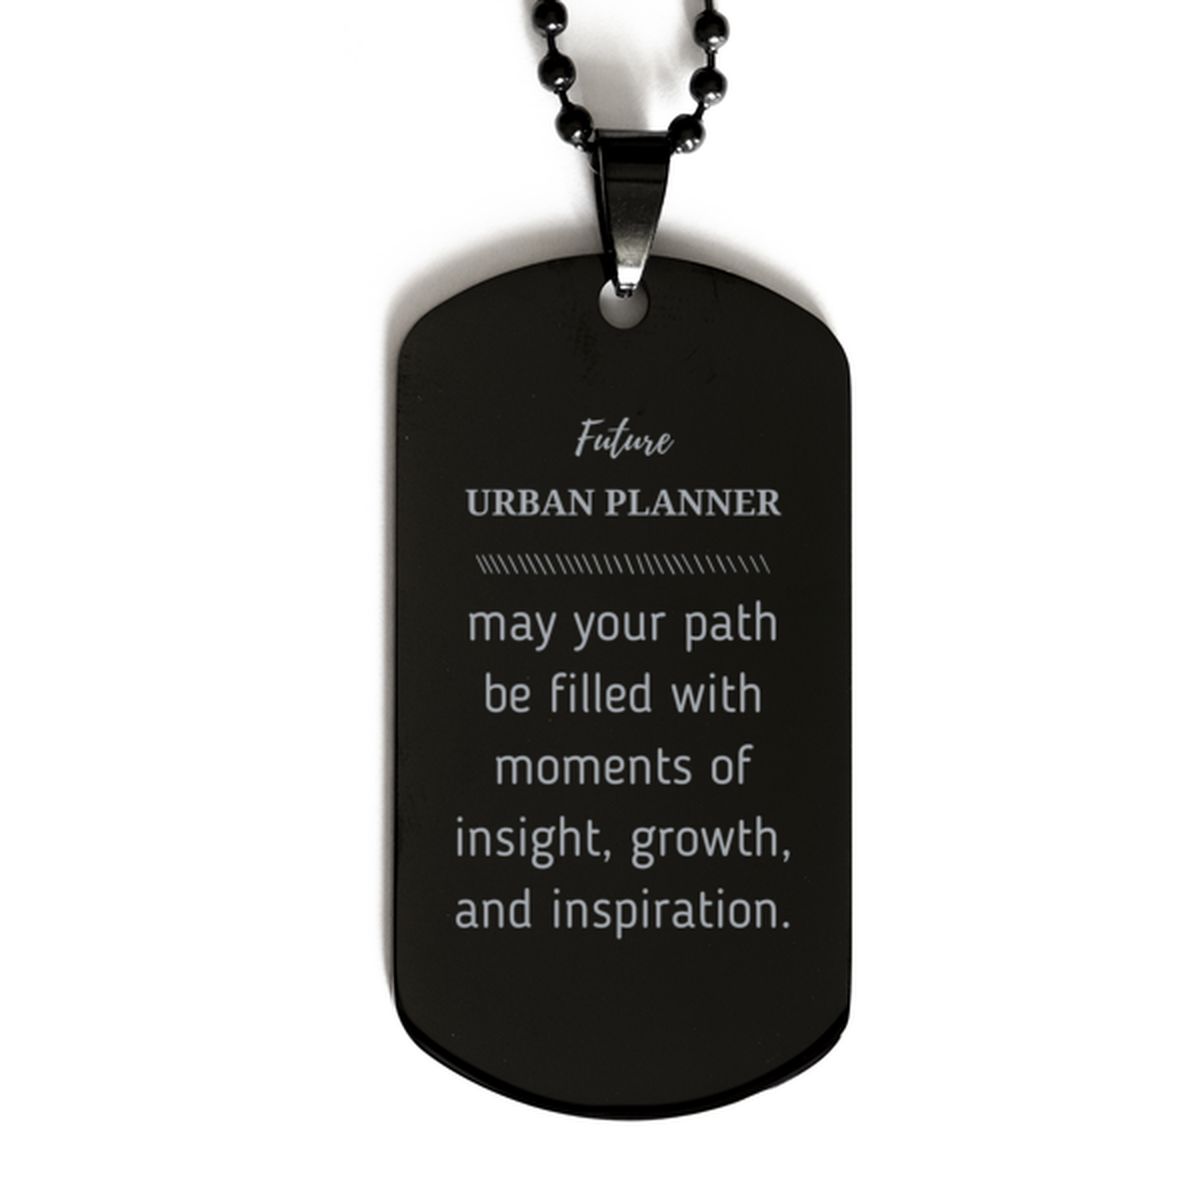 Future Urban Planner Gifts, May your path be filled with moments of insight, Graduation Gifts for New Urban Planner, Christmas Unique Black Dog Tag For Men, Women, Friends